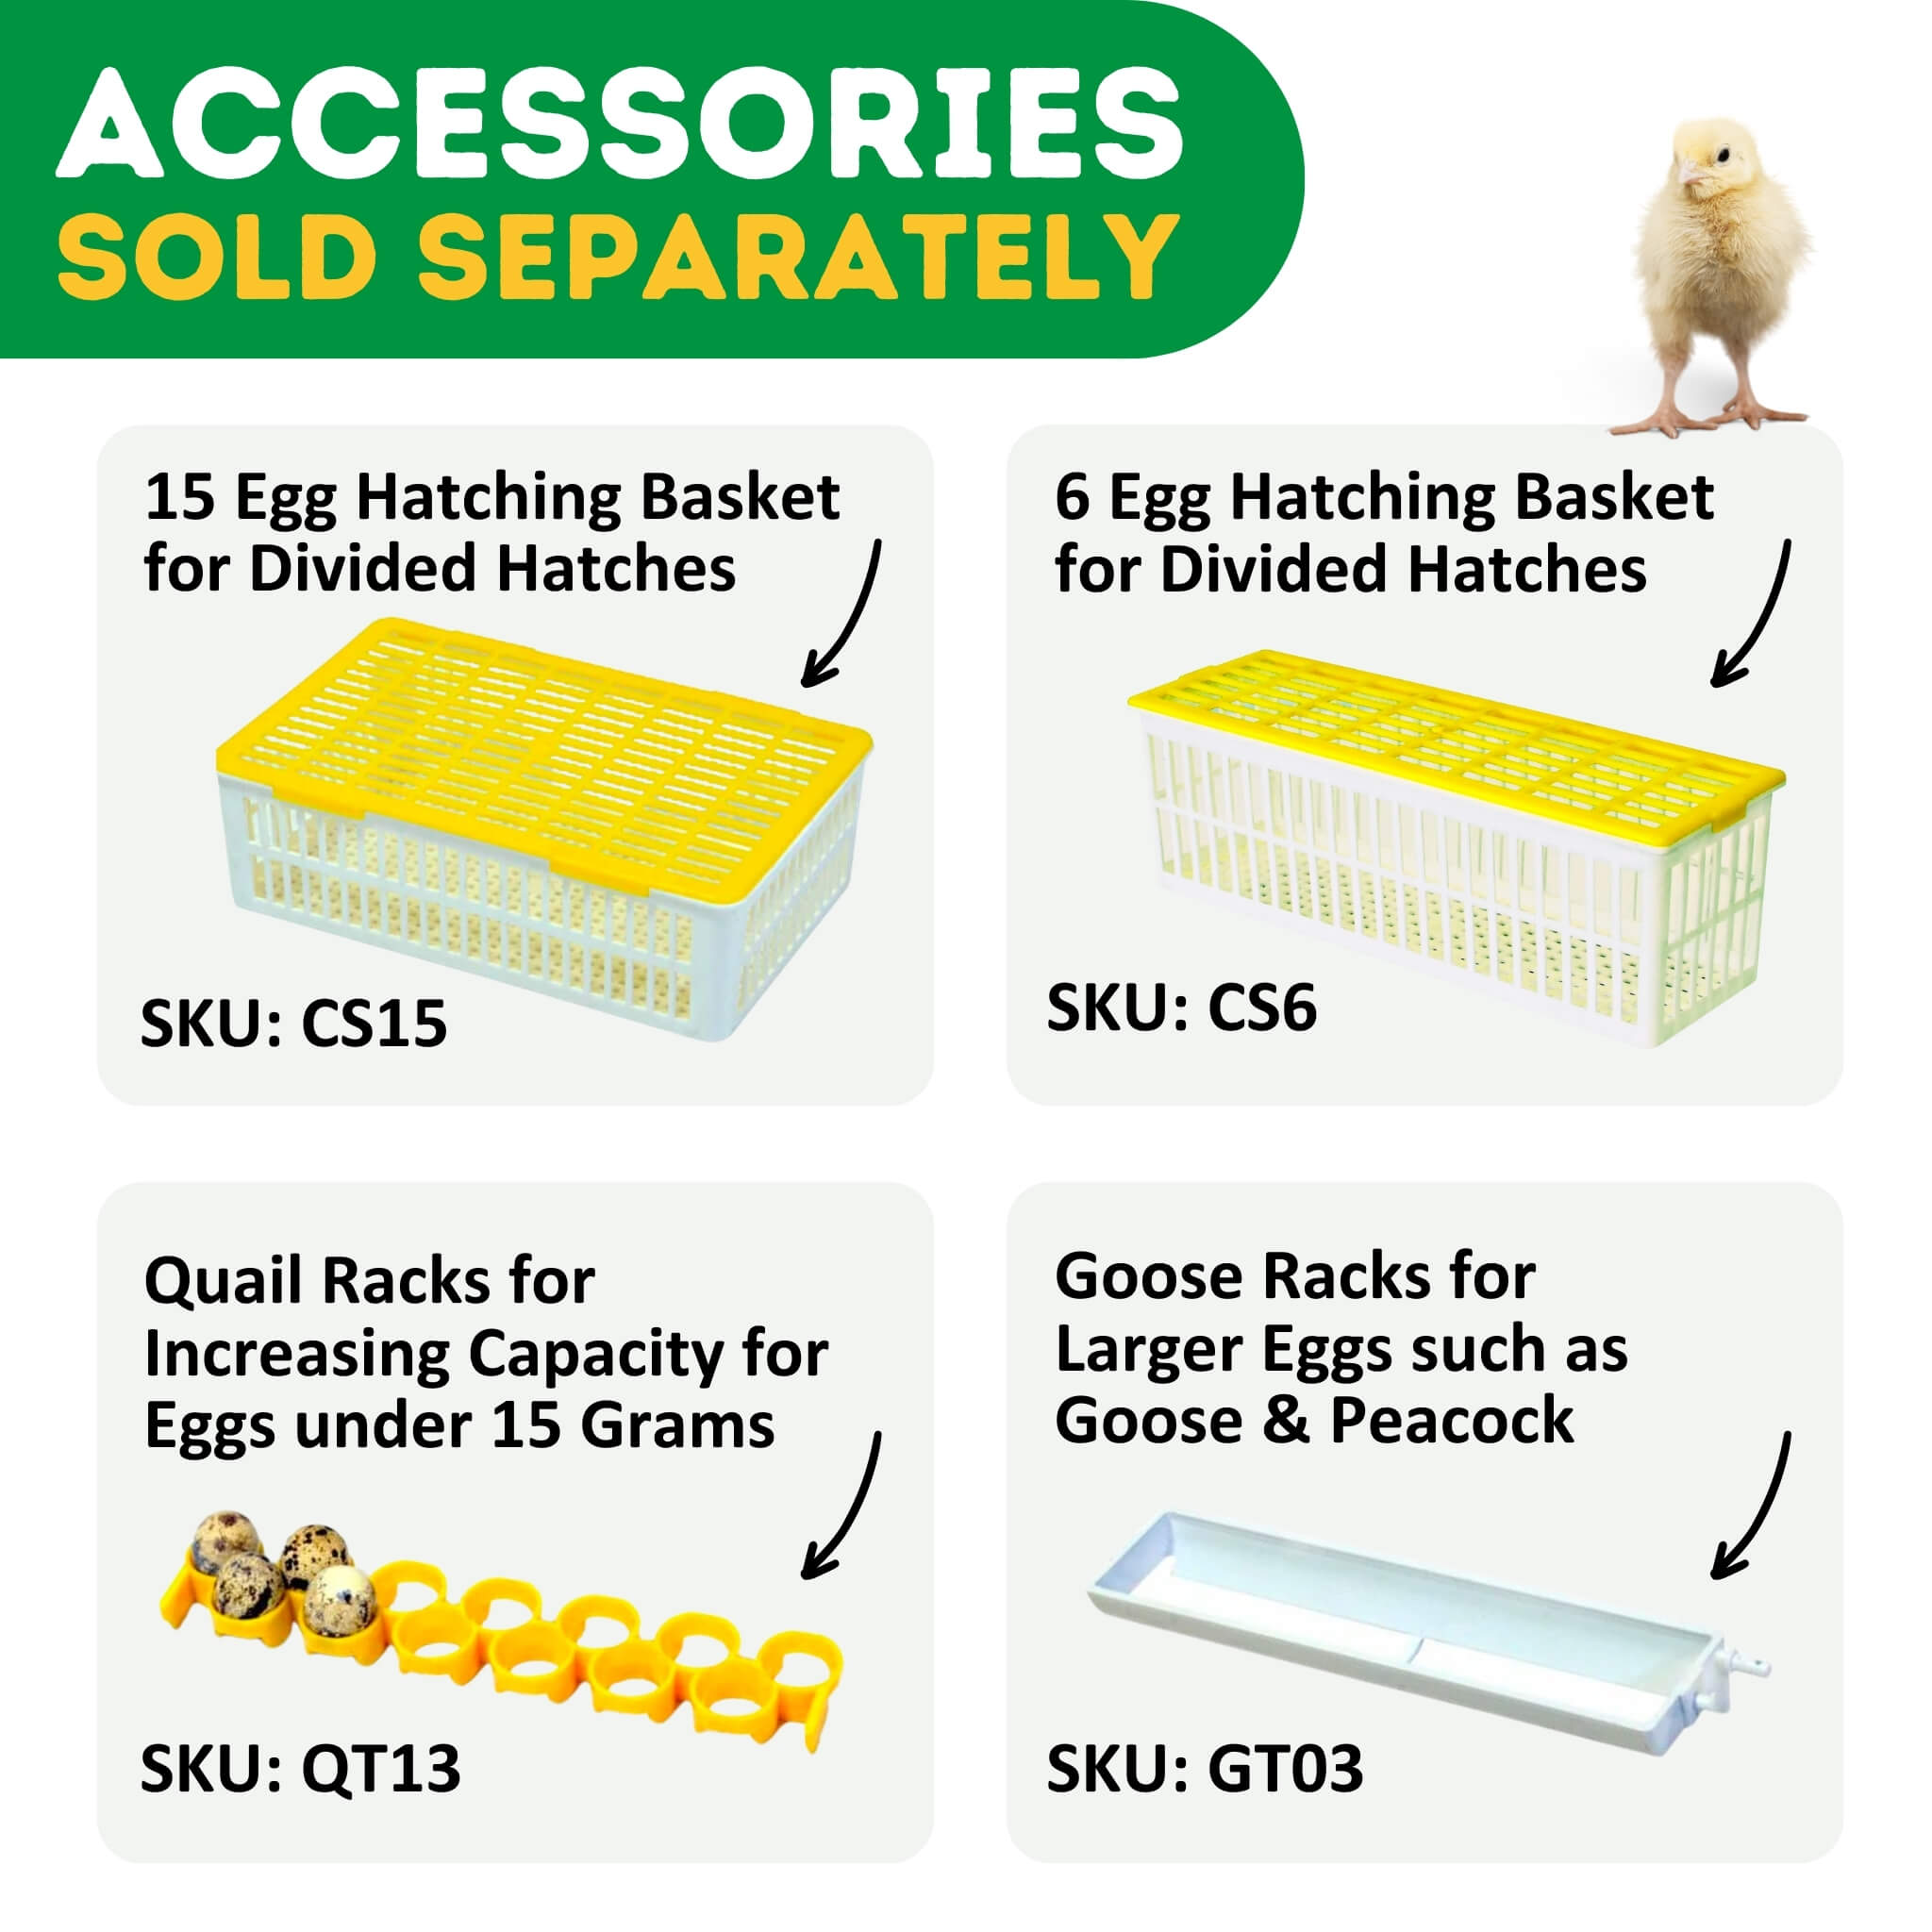 Displays 4 potential accessories for CT60SH incubator such as egg dividing baskets, quail racks and goose racks